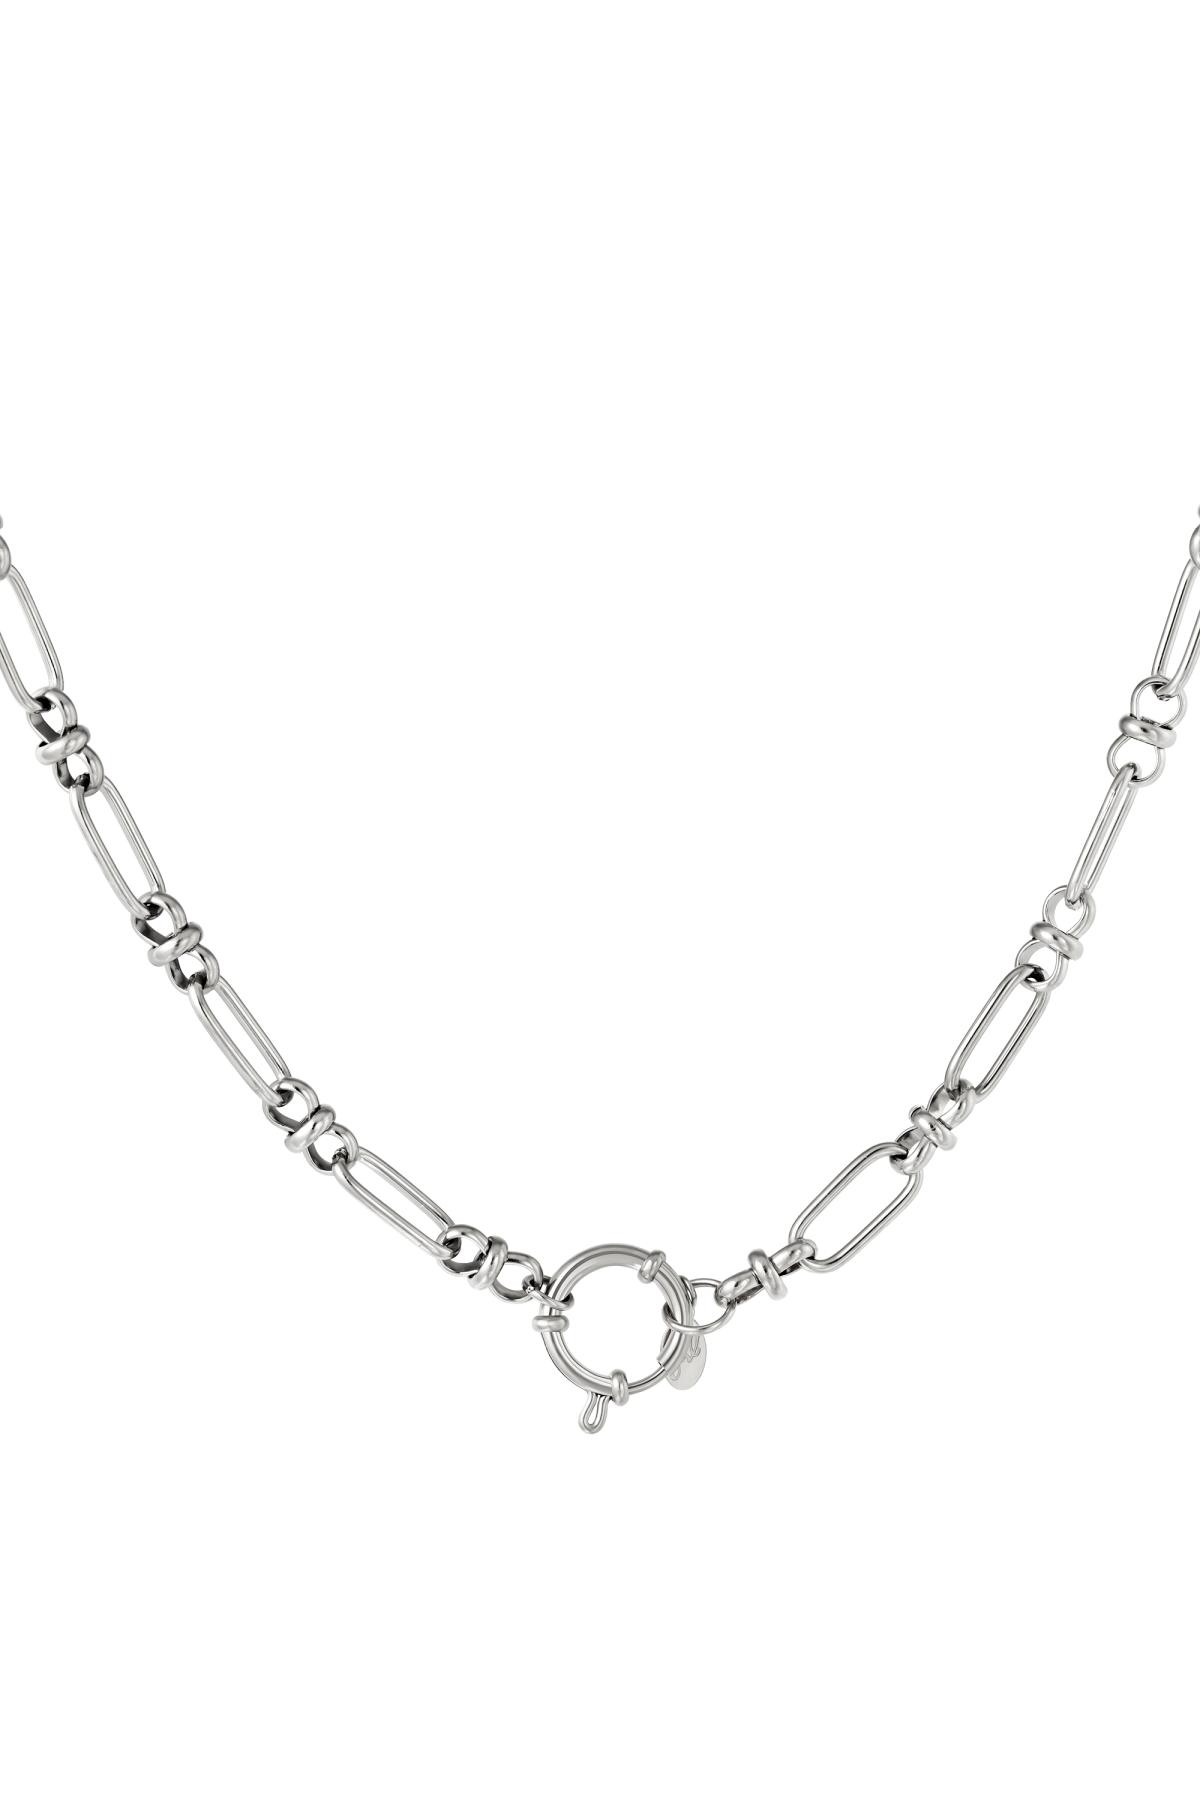 Round closure necklace Silver Stainless Steel